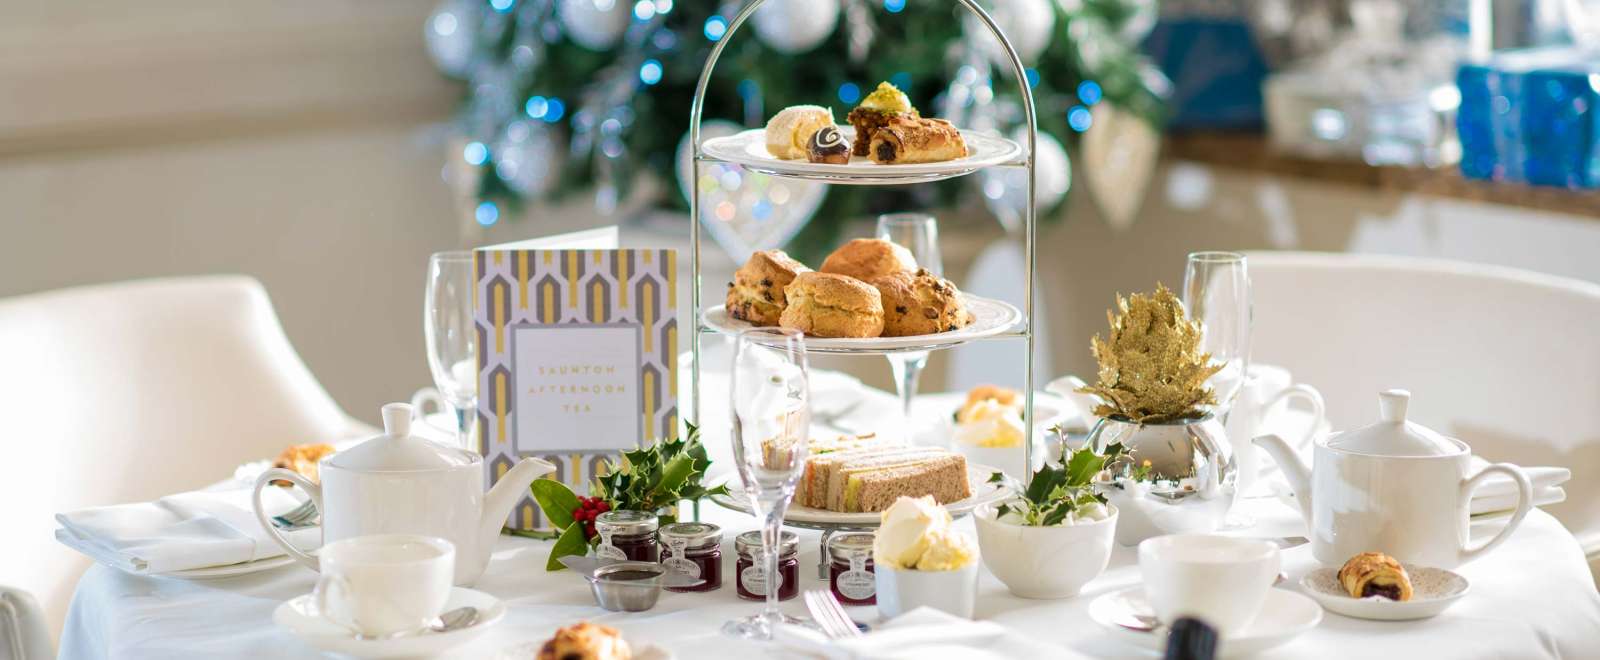 Saunton Sands Hotel Restaurant Dining Festive Afternoon Tea with Christmas Decorations